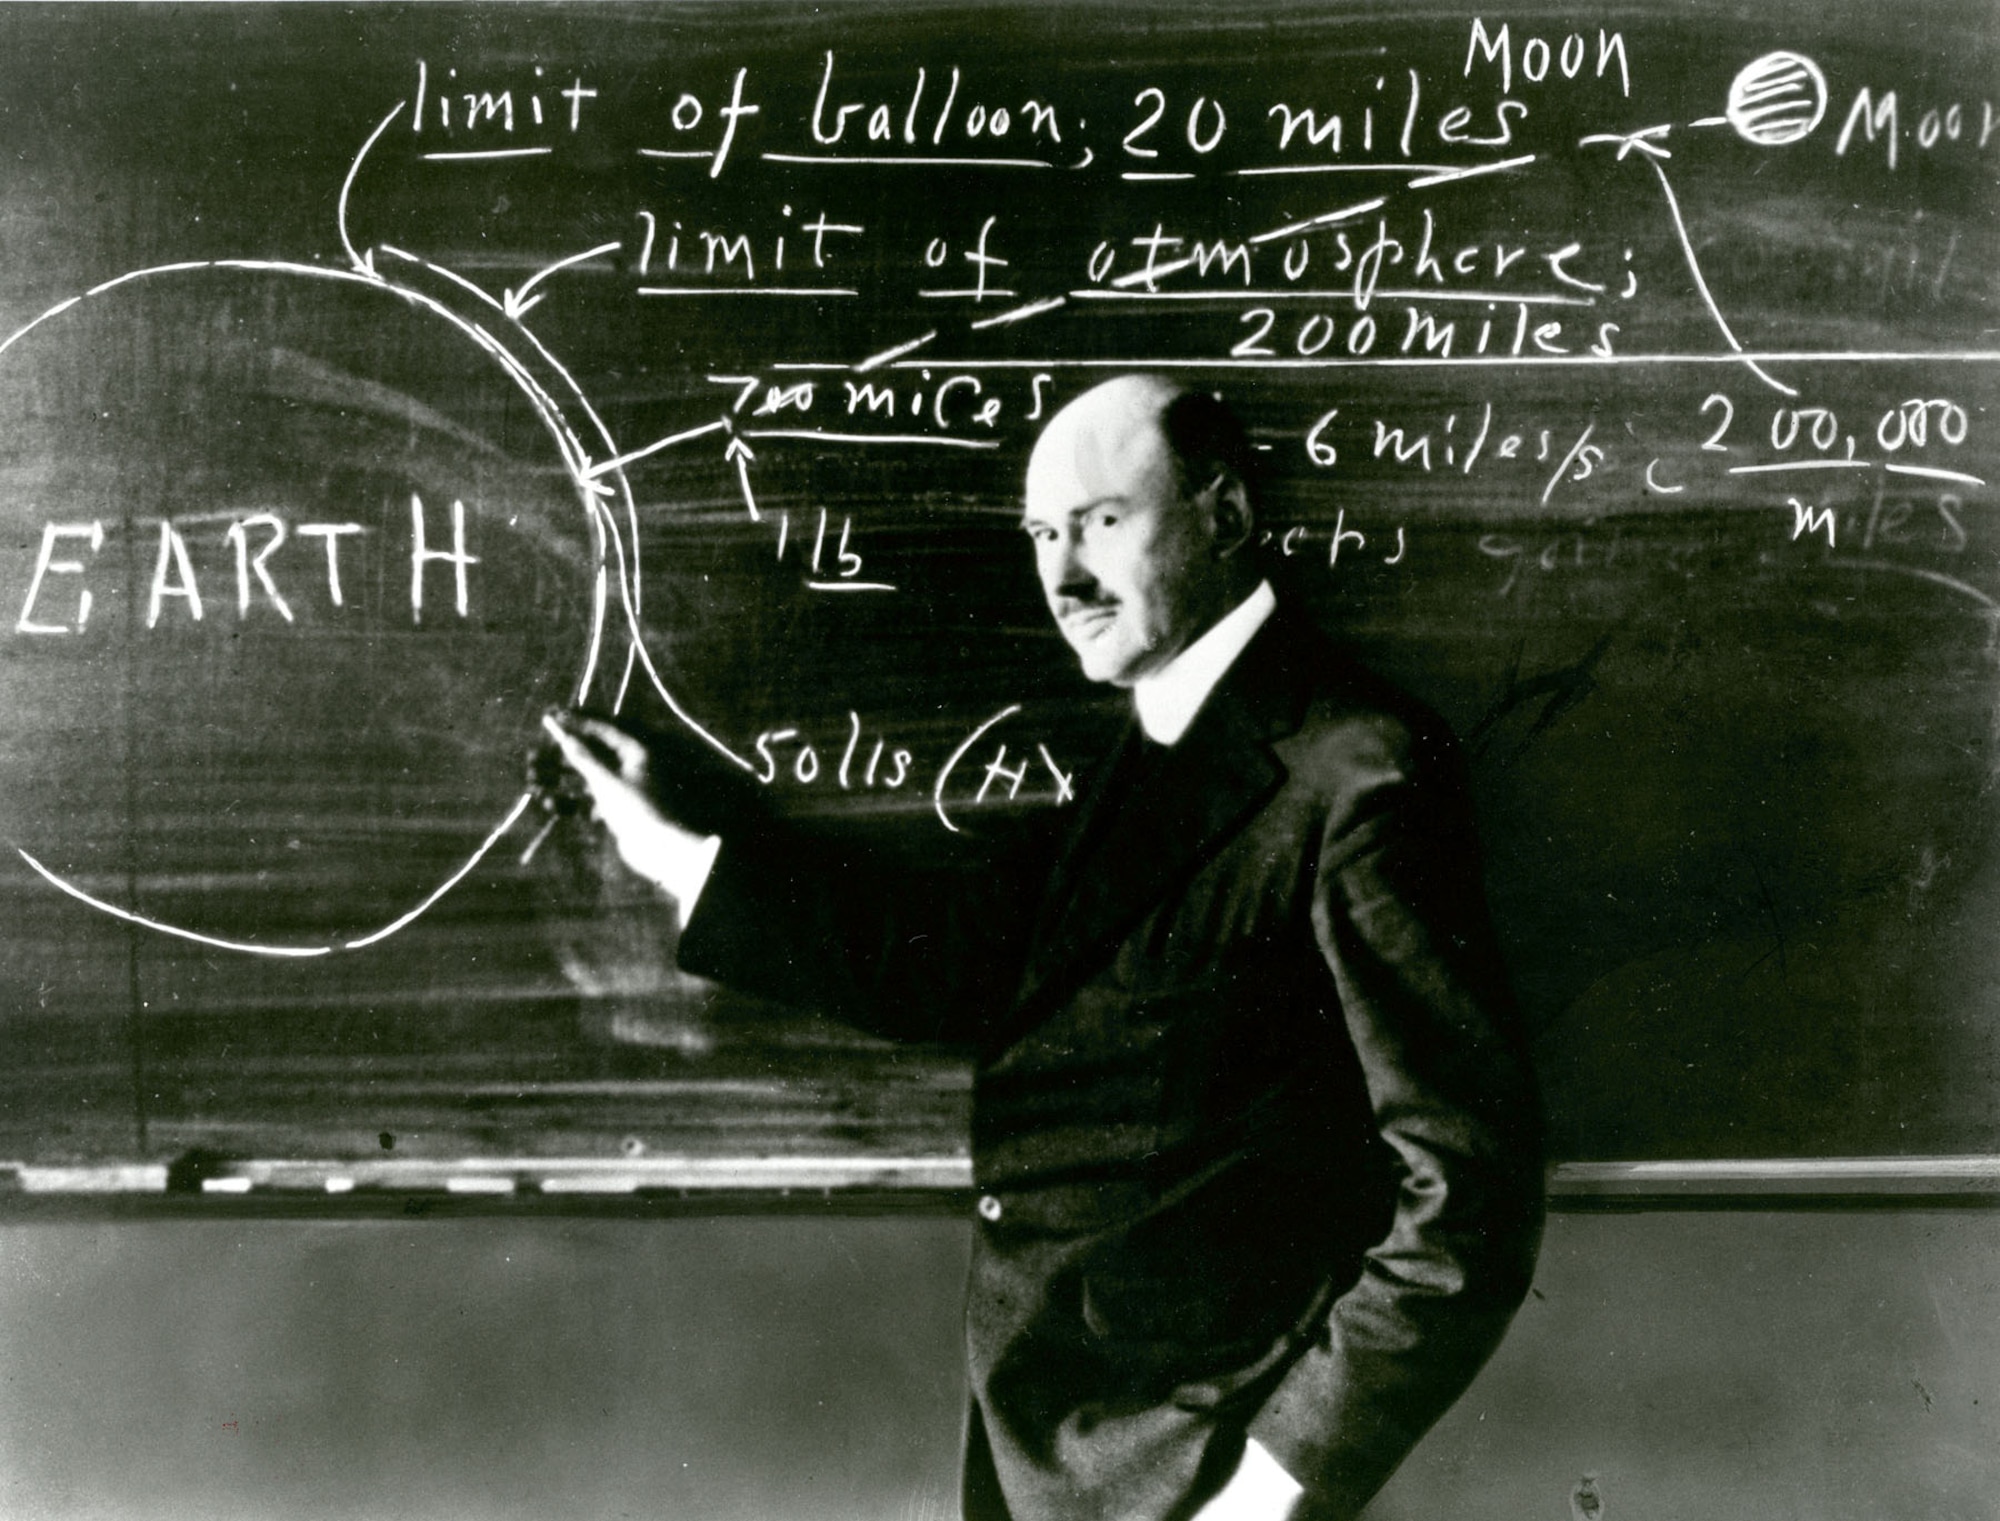 Robert Goddard was a theoretical physicist as well as a talented engineer. He taught at Clark University, Worcester, Mass., beginning in 1914, and became director of the school’s Physical Laboratory in 1923.